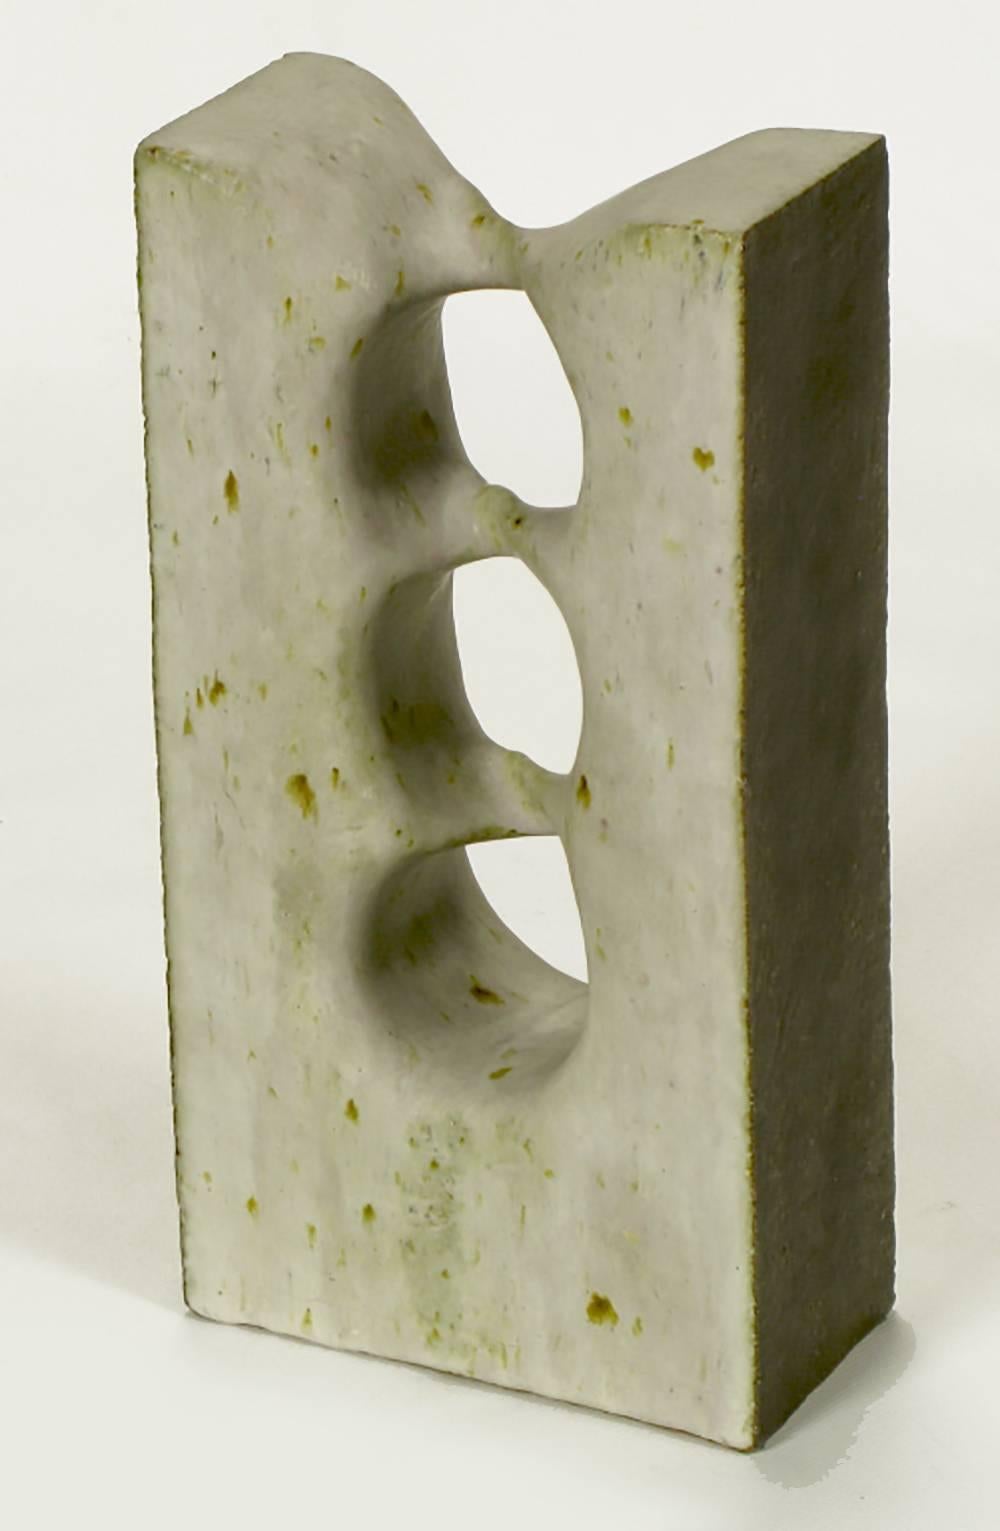 Mid-20th Century 1967 Double-Sided Abstract Ceramic Sculpture by Tomiya Matsuda (1939-2011)